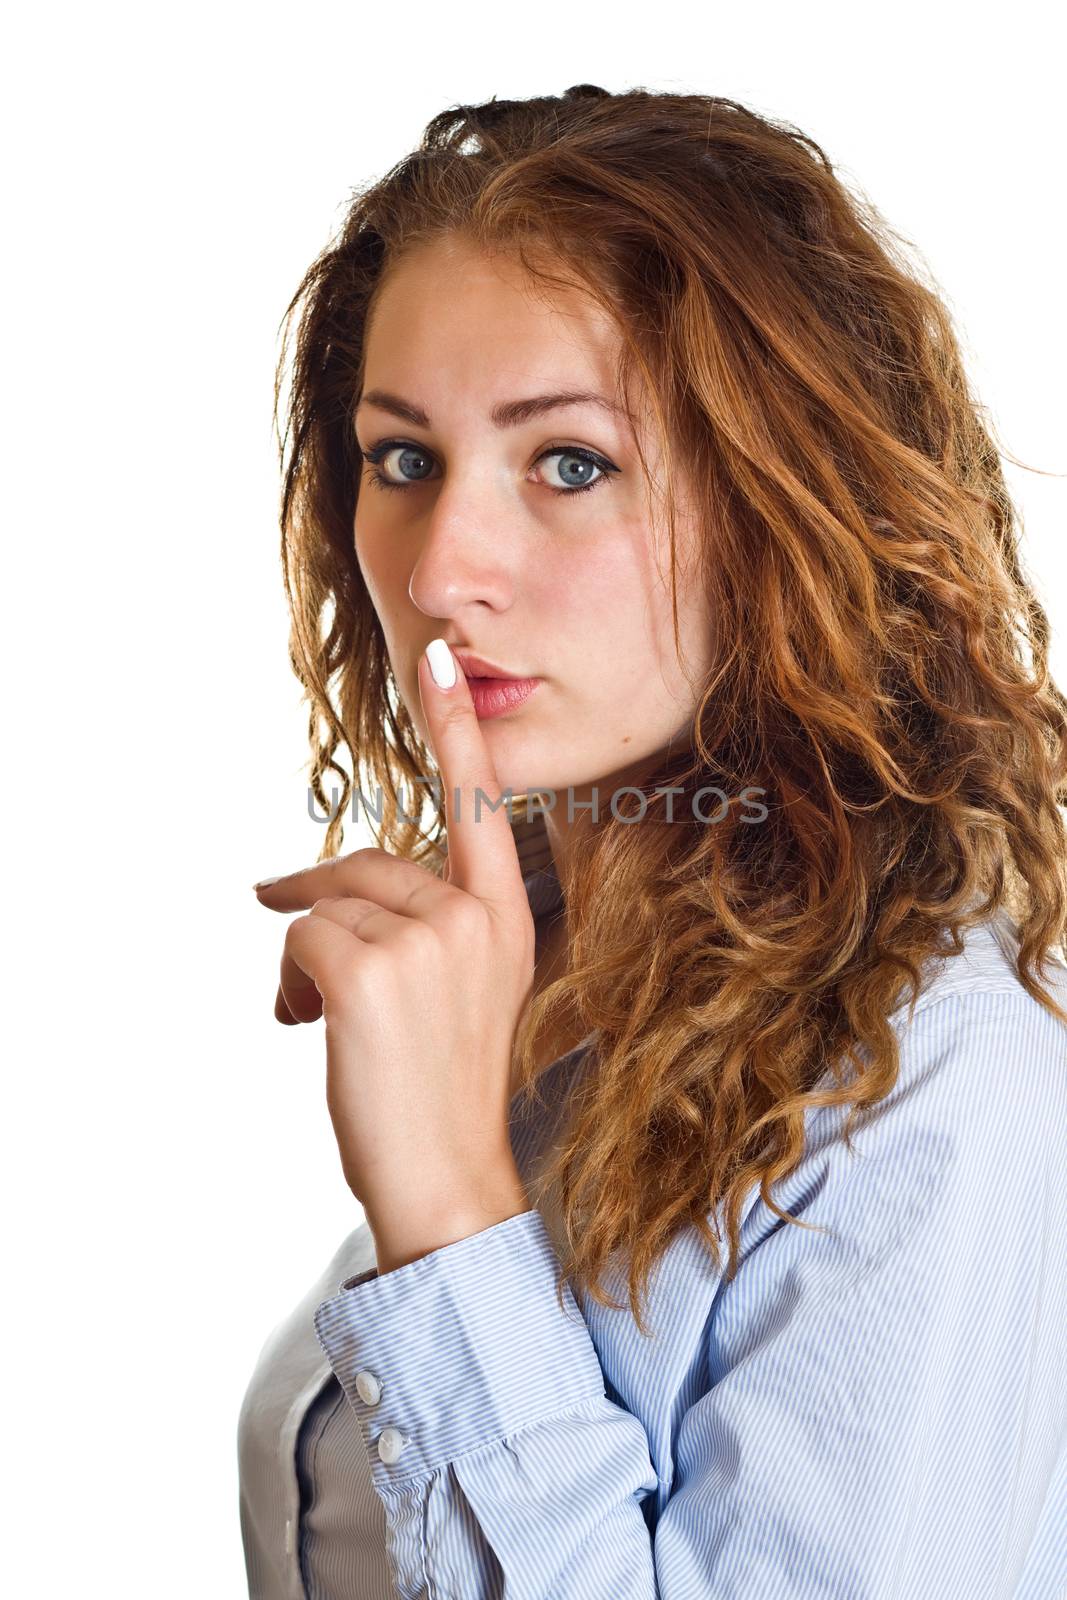 Business woman keeping it secret over a white background.